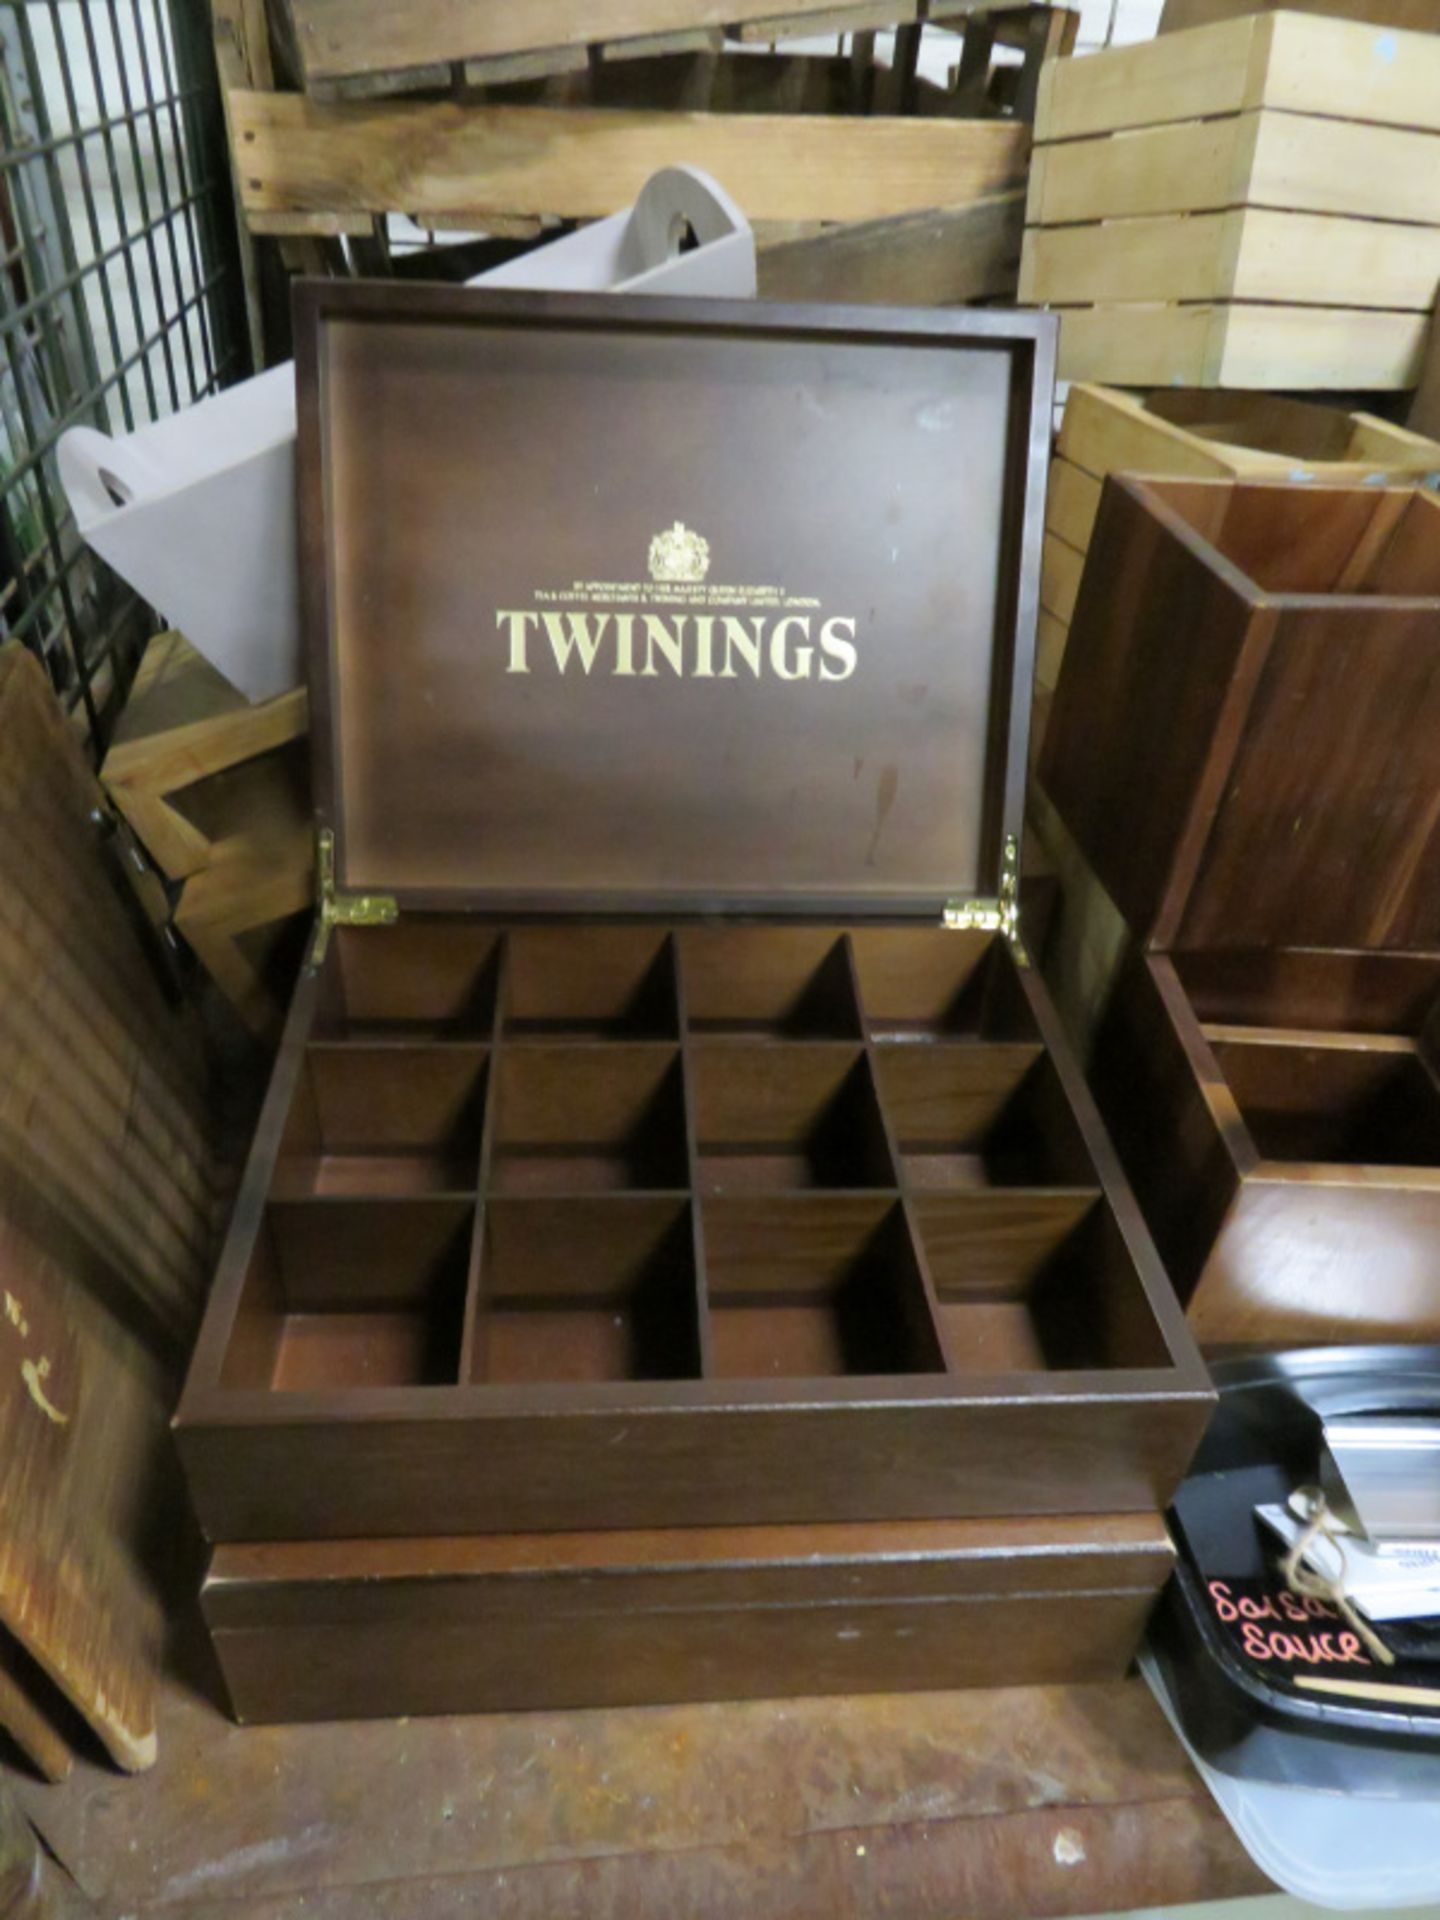 Wooden Boxes, Chopping Boards, Twining Tea Bag Boxes, stands, oversized pepper grinders - Image 2 of 6